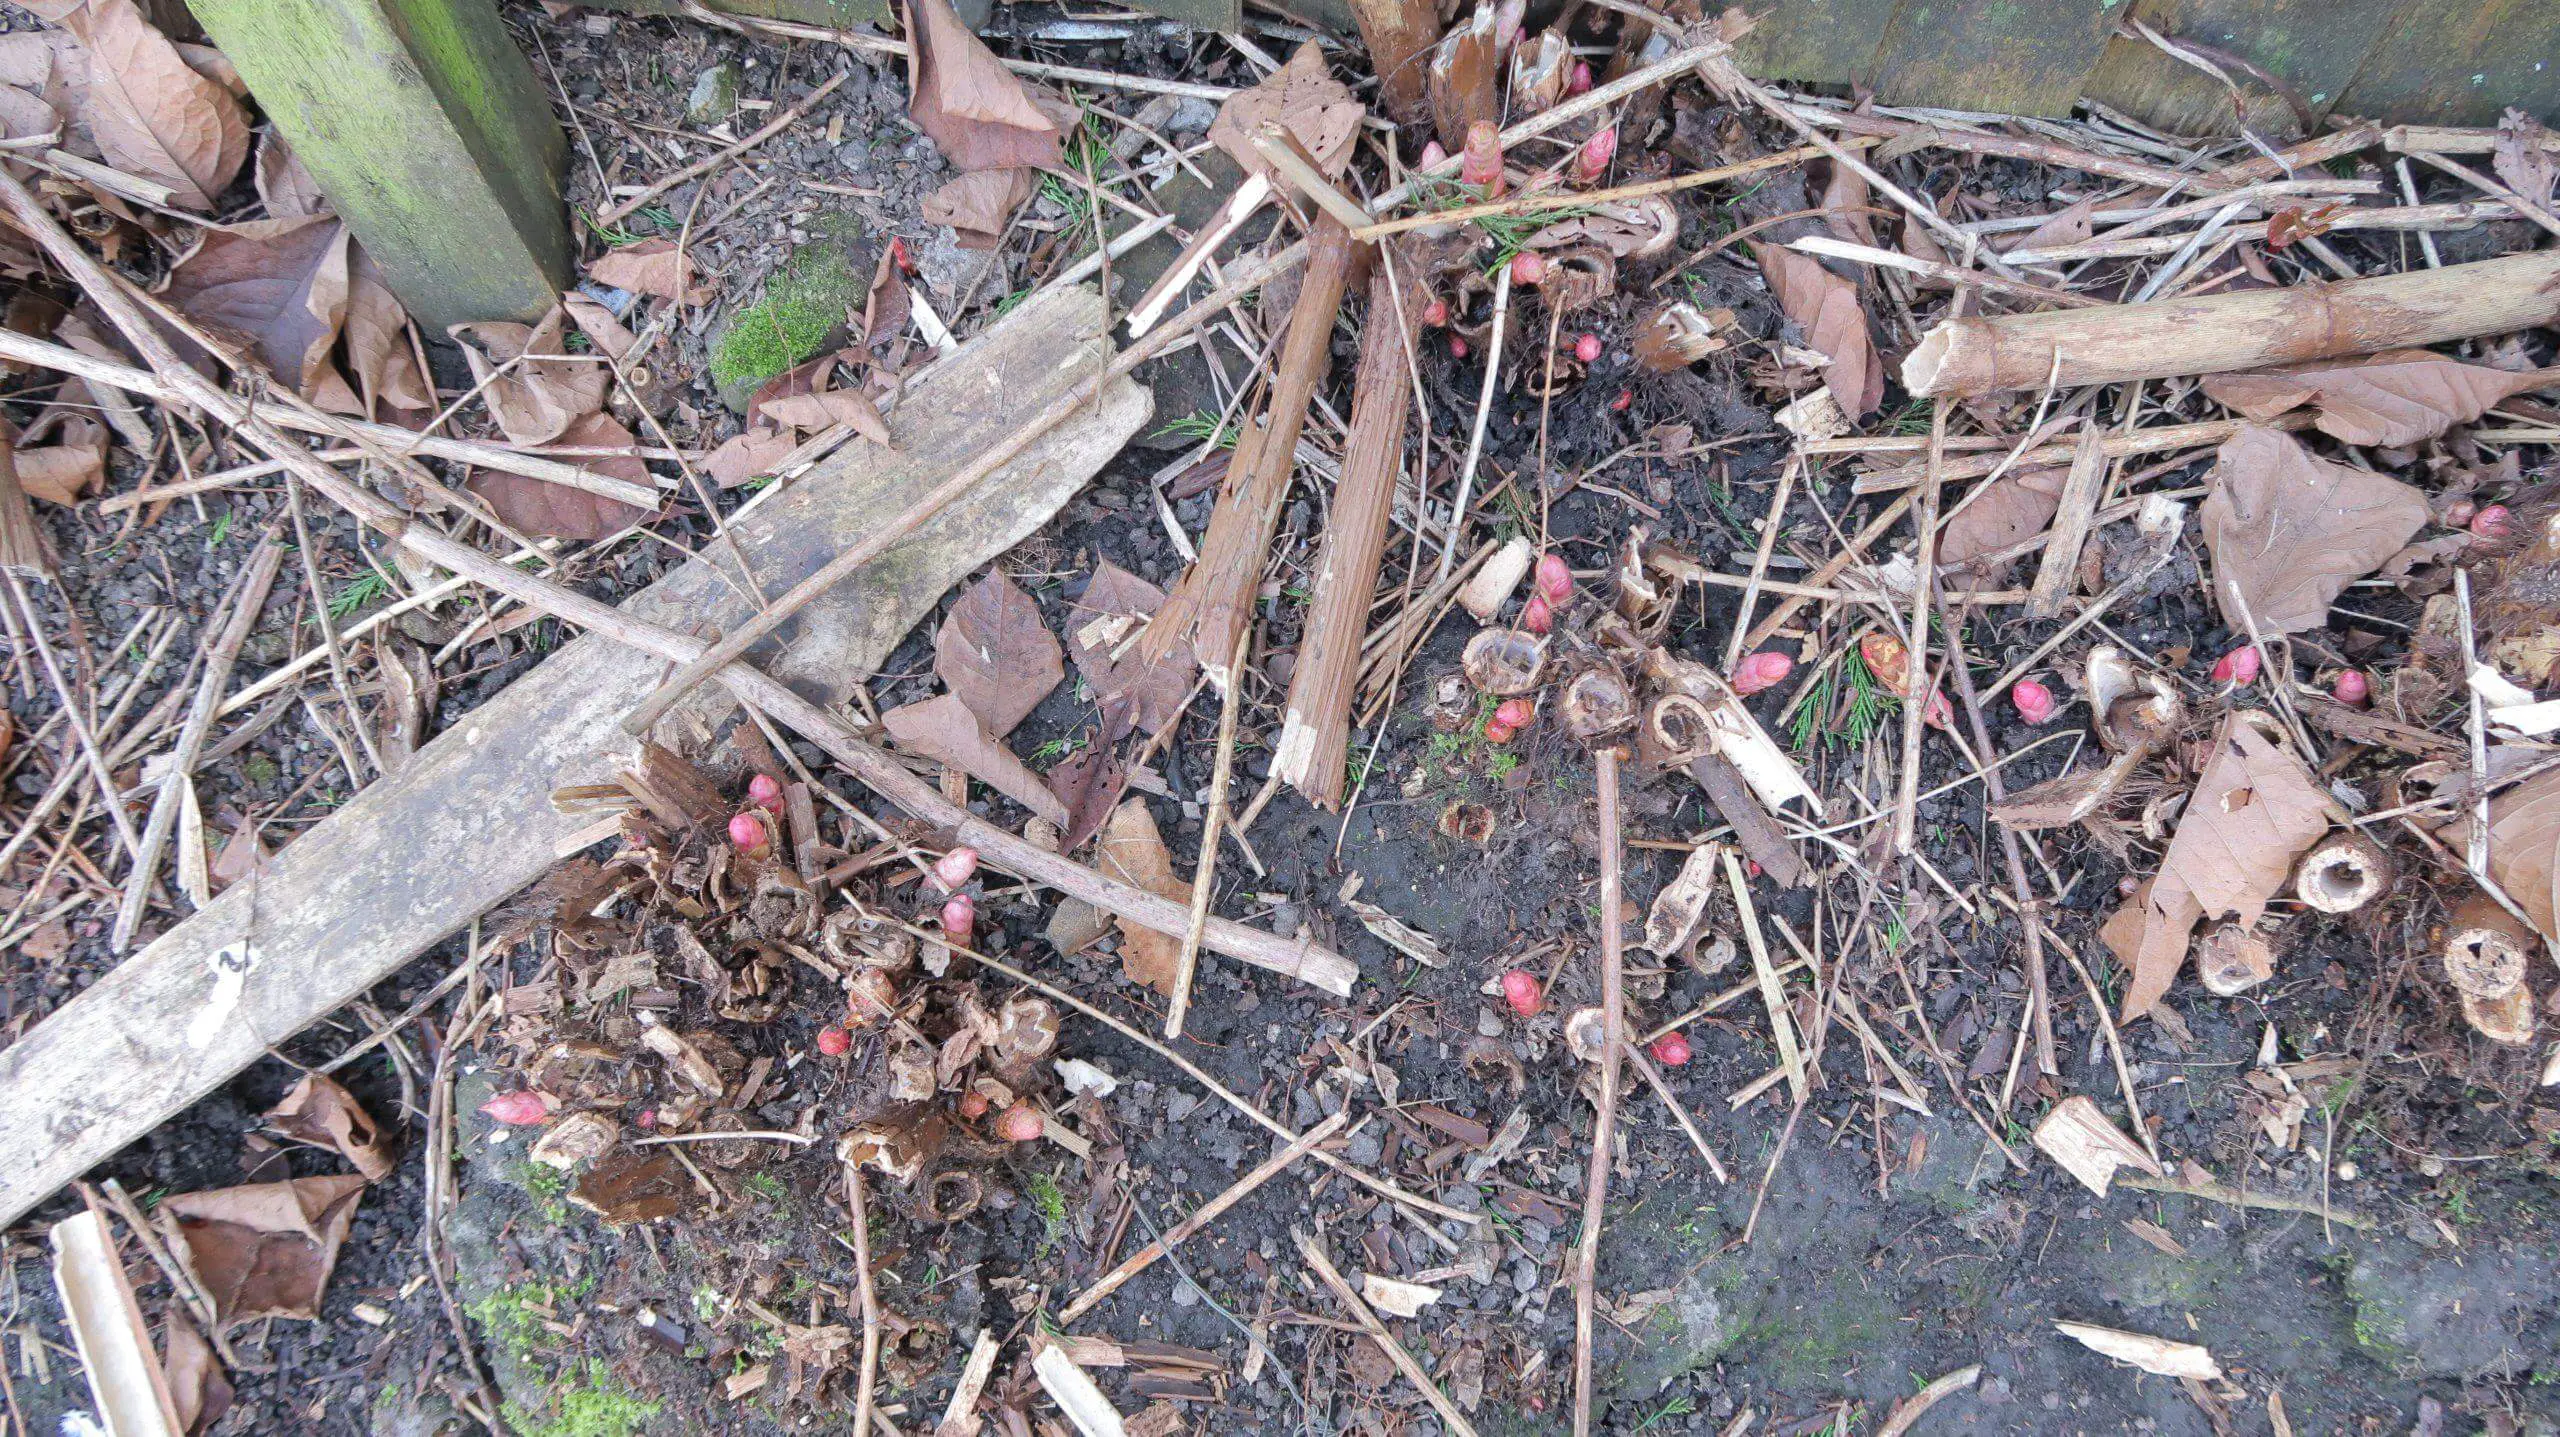 Protecting the soil microbes requires the need to eliminate Japanese knotweed and its crown as soon as possible